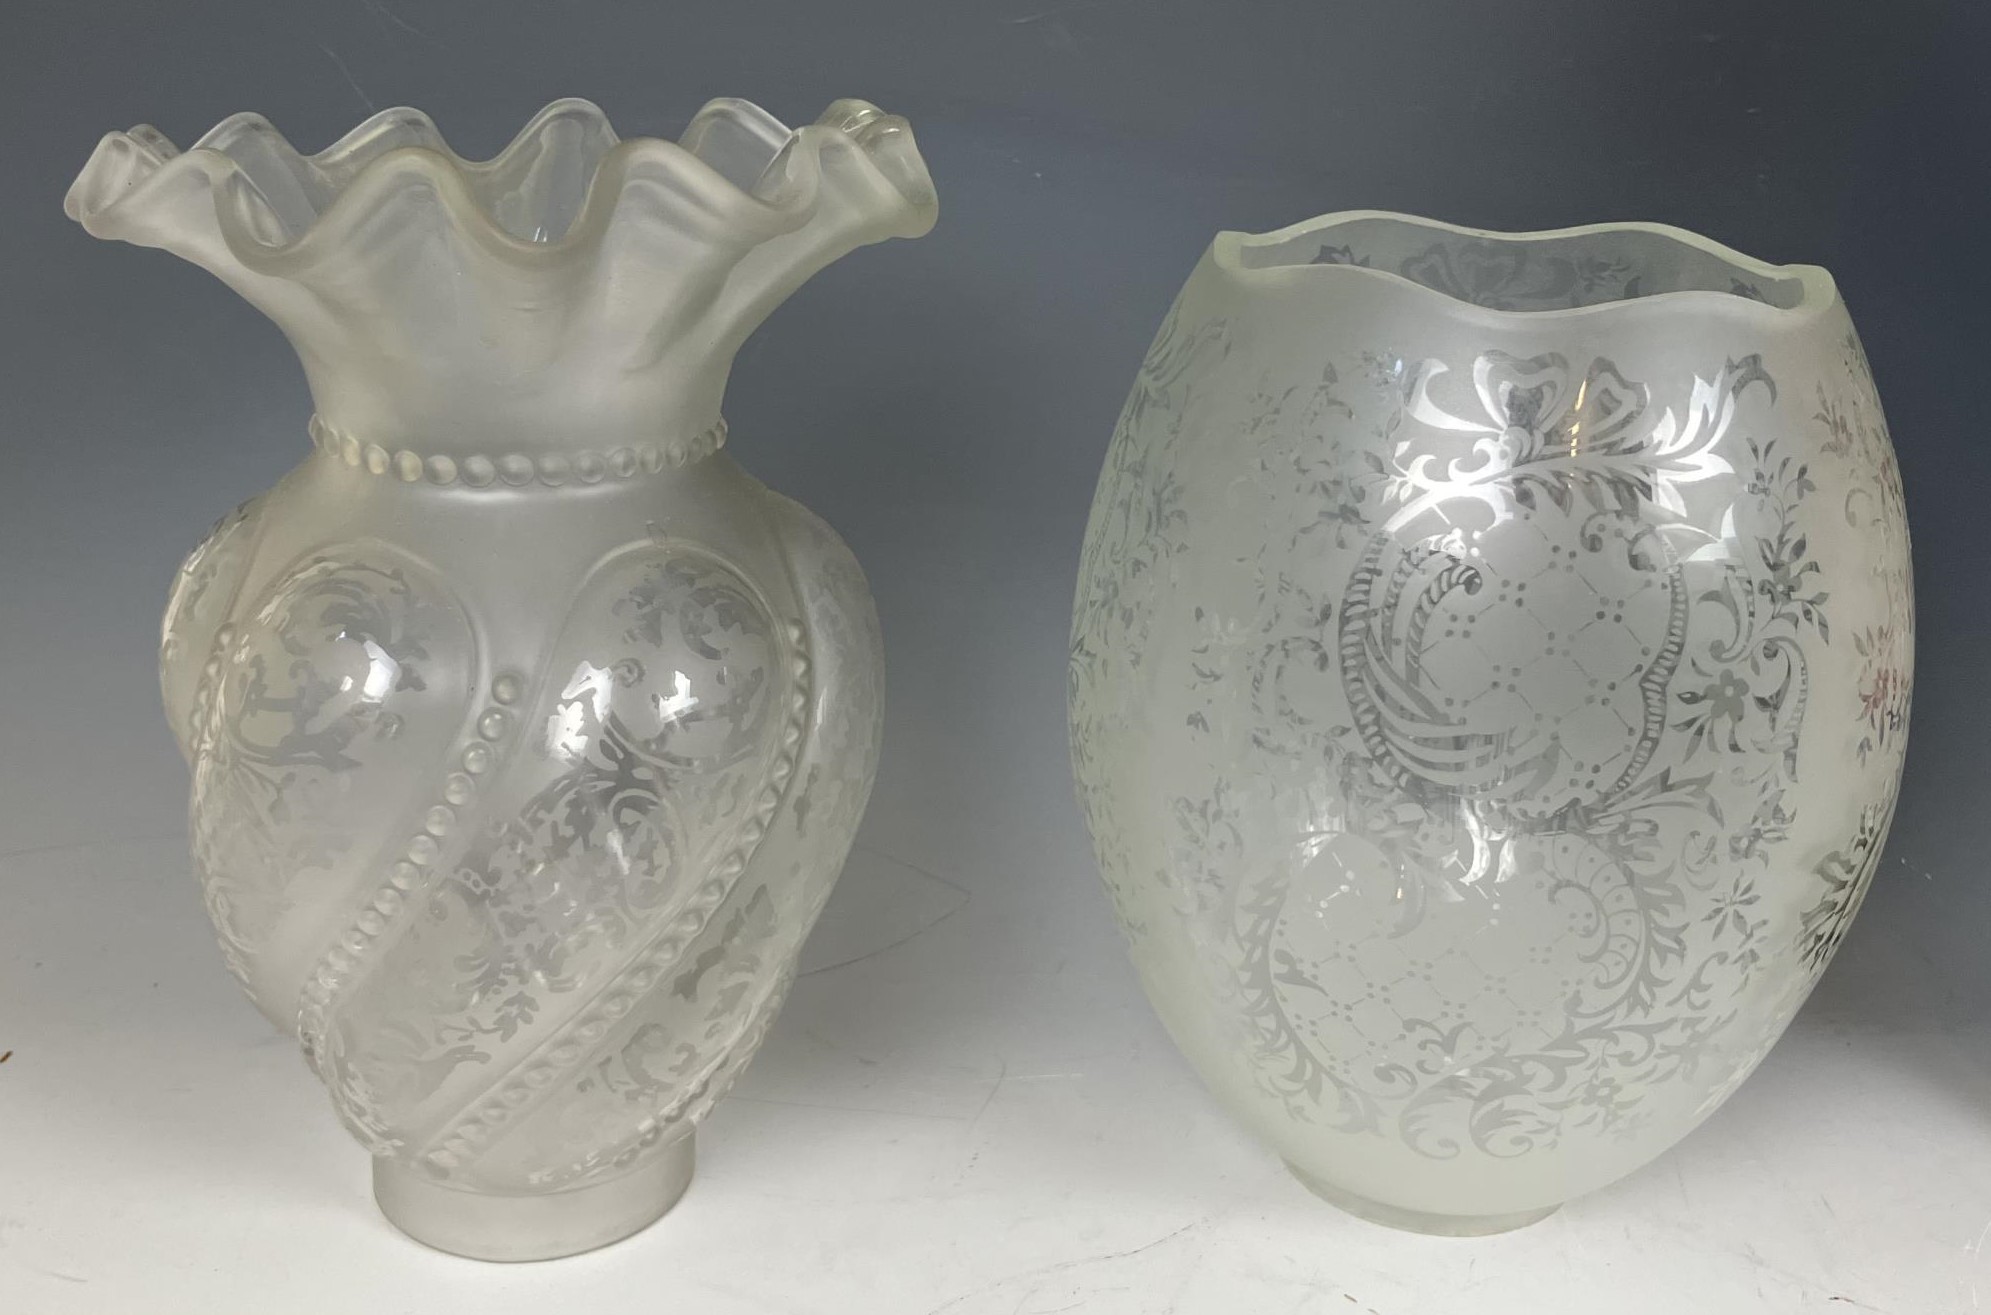 A Japanese Imari vase, converted to an oil lamp, with an acid etched glass shade, 46 cm high, and - Image 6 of 6